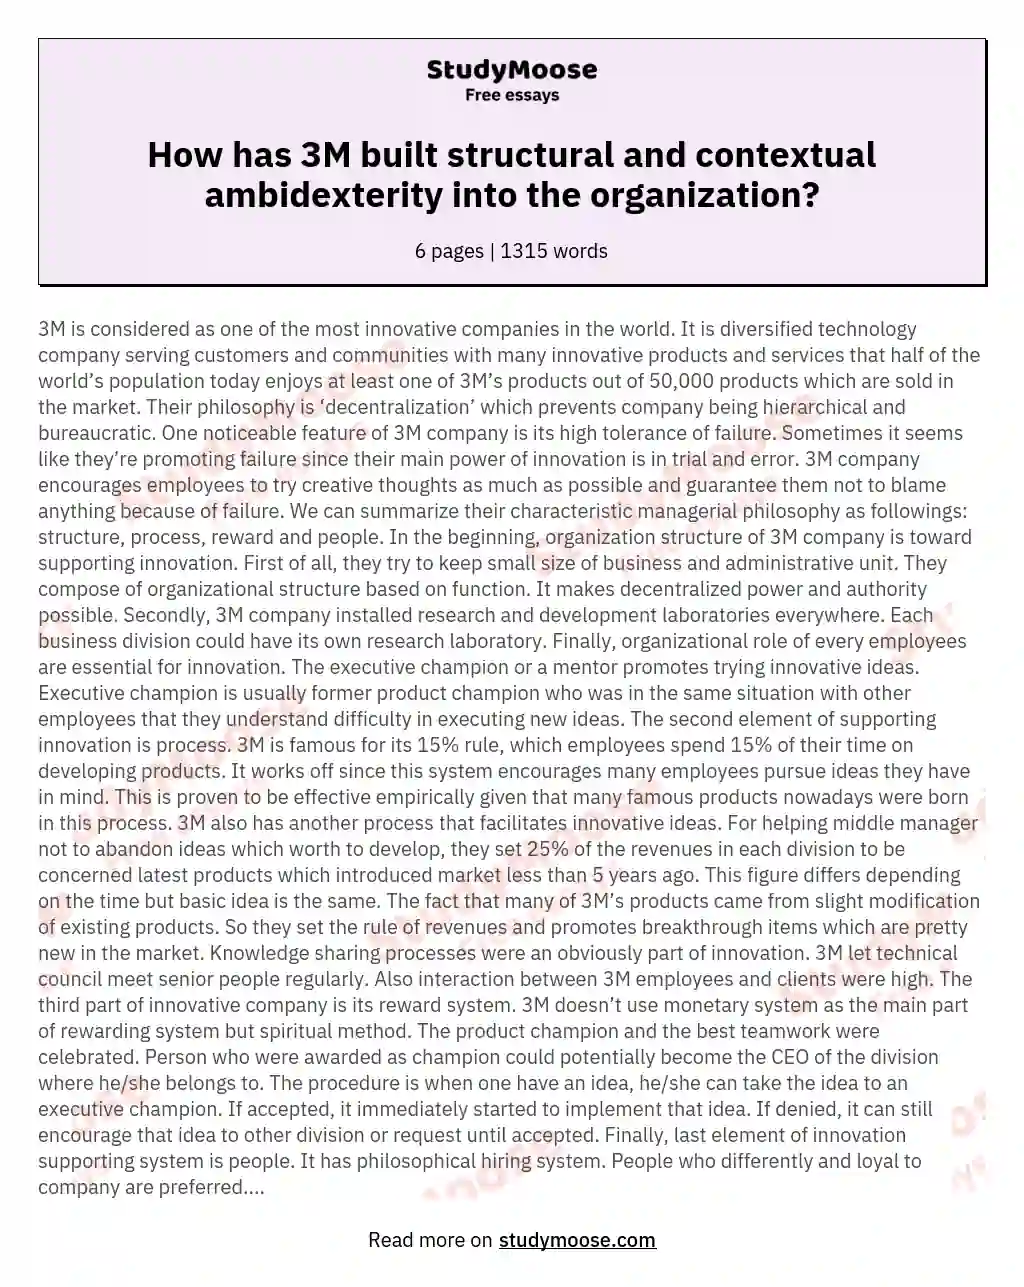 How has 3M built structural and contextual ambidexterity into the organization? essay